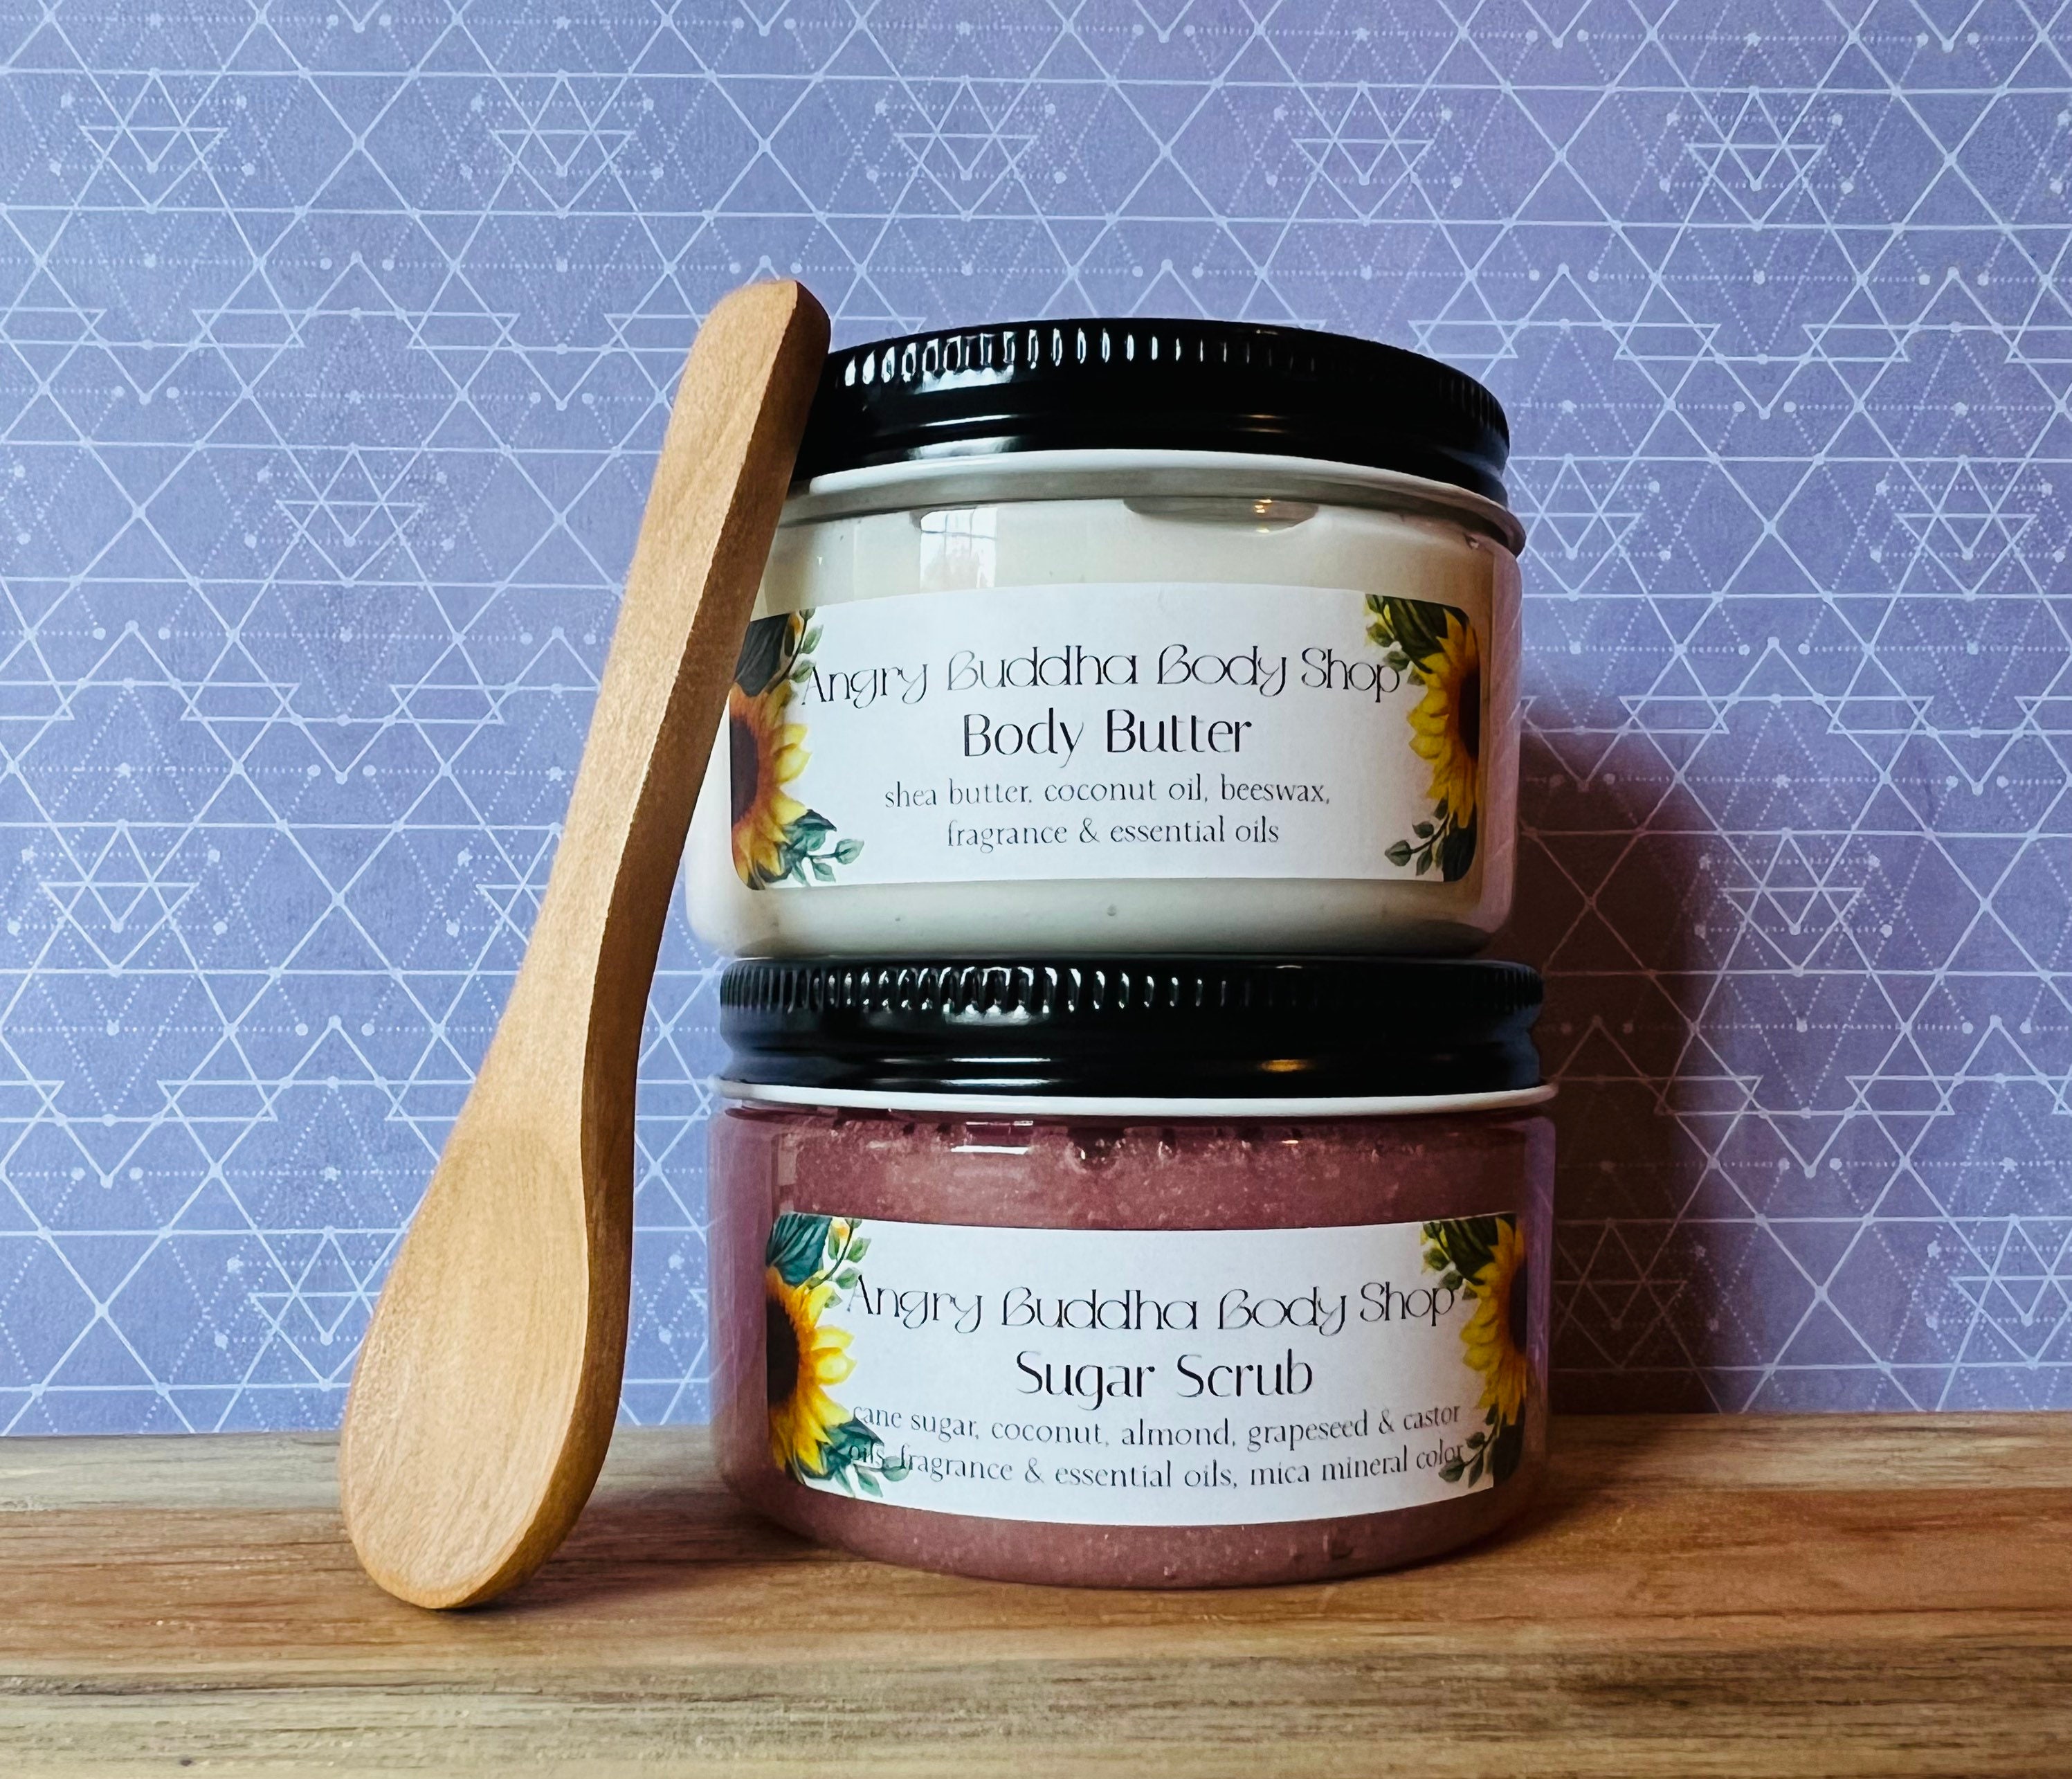 Better Shea Butter Body Butter Making Kit - Includes Raw Mango Butter, Raw  Apricot Oil, Pink Mica, 2 jars and Recipes Card with Link to Video Tutorial